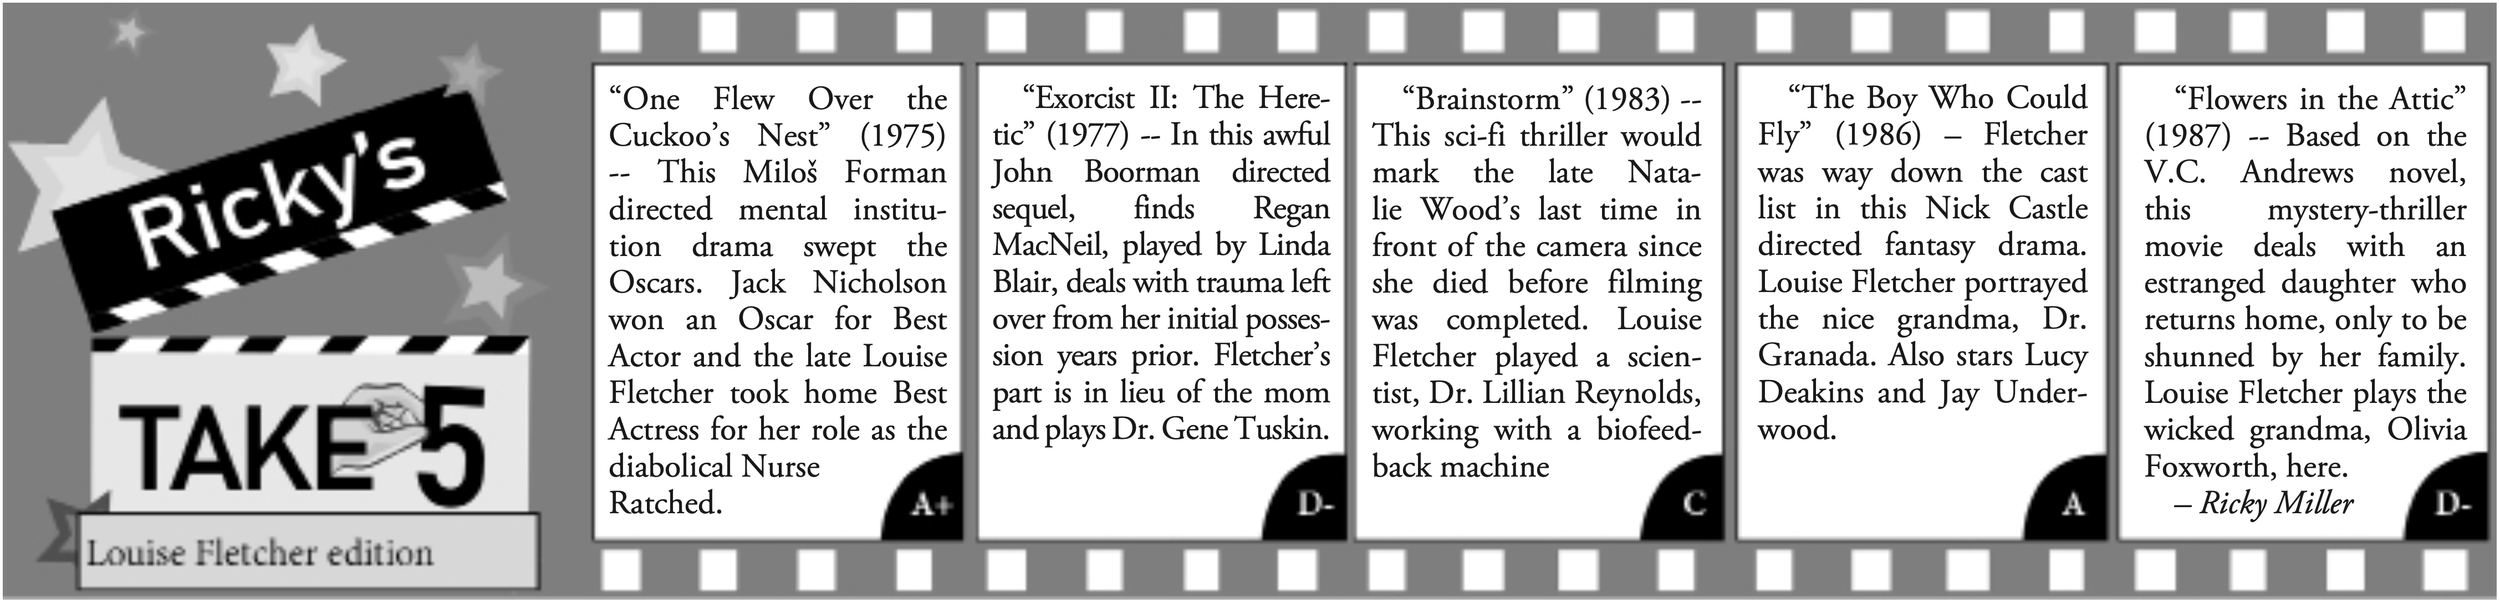 Clipping of Chronicle Entertainment Editor Ricky Miller's top picks for Louise Fletcher's career.